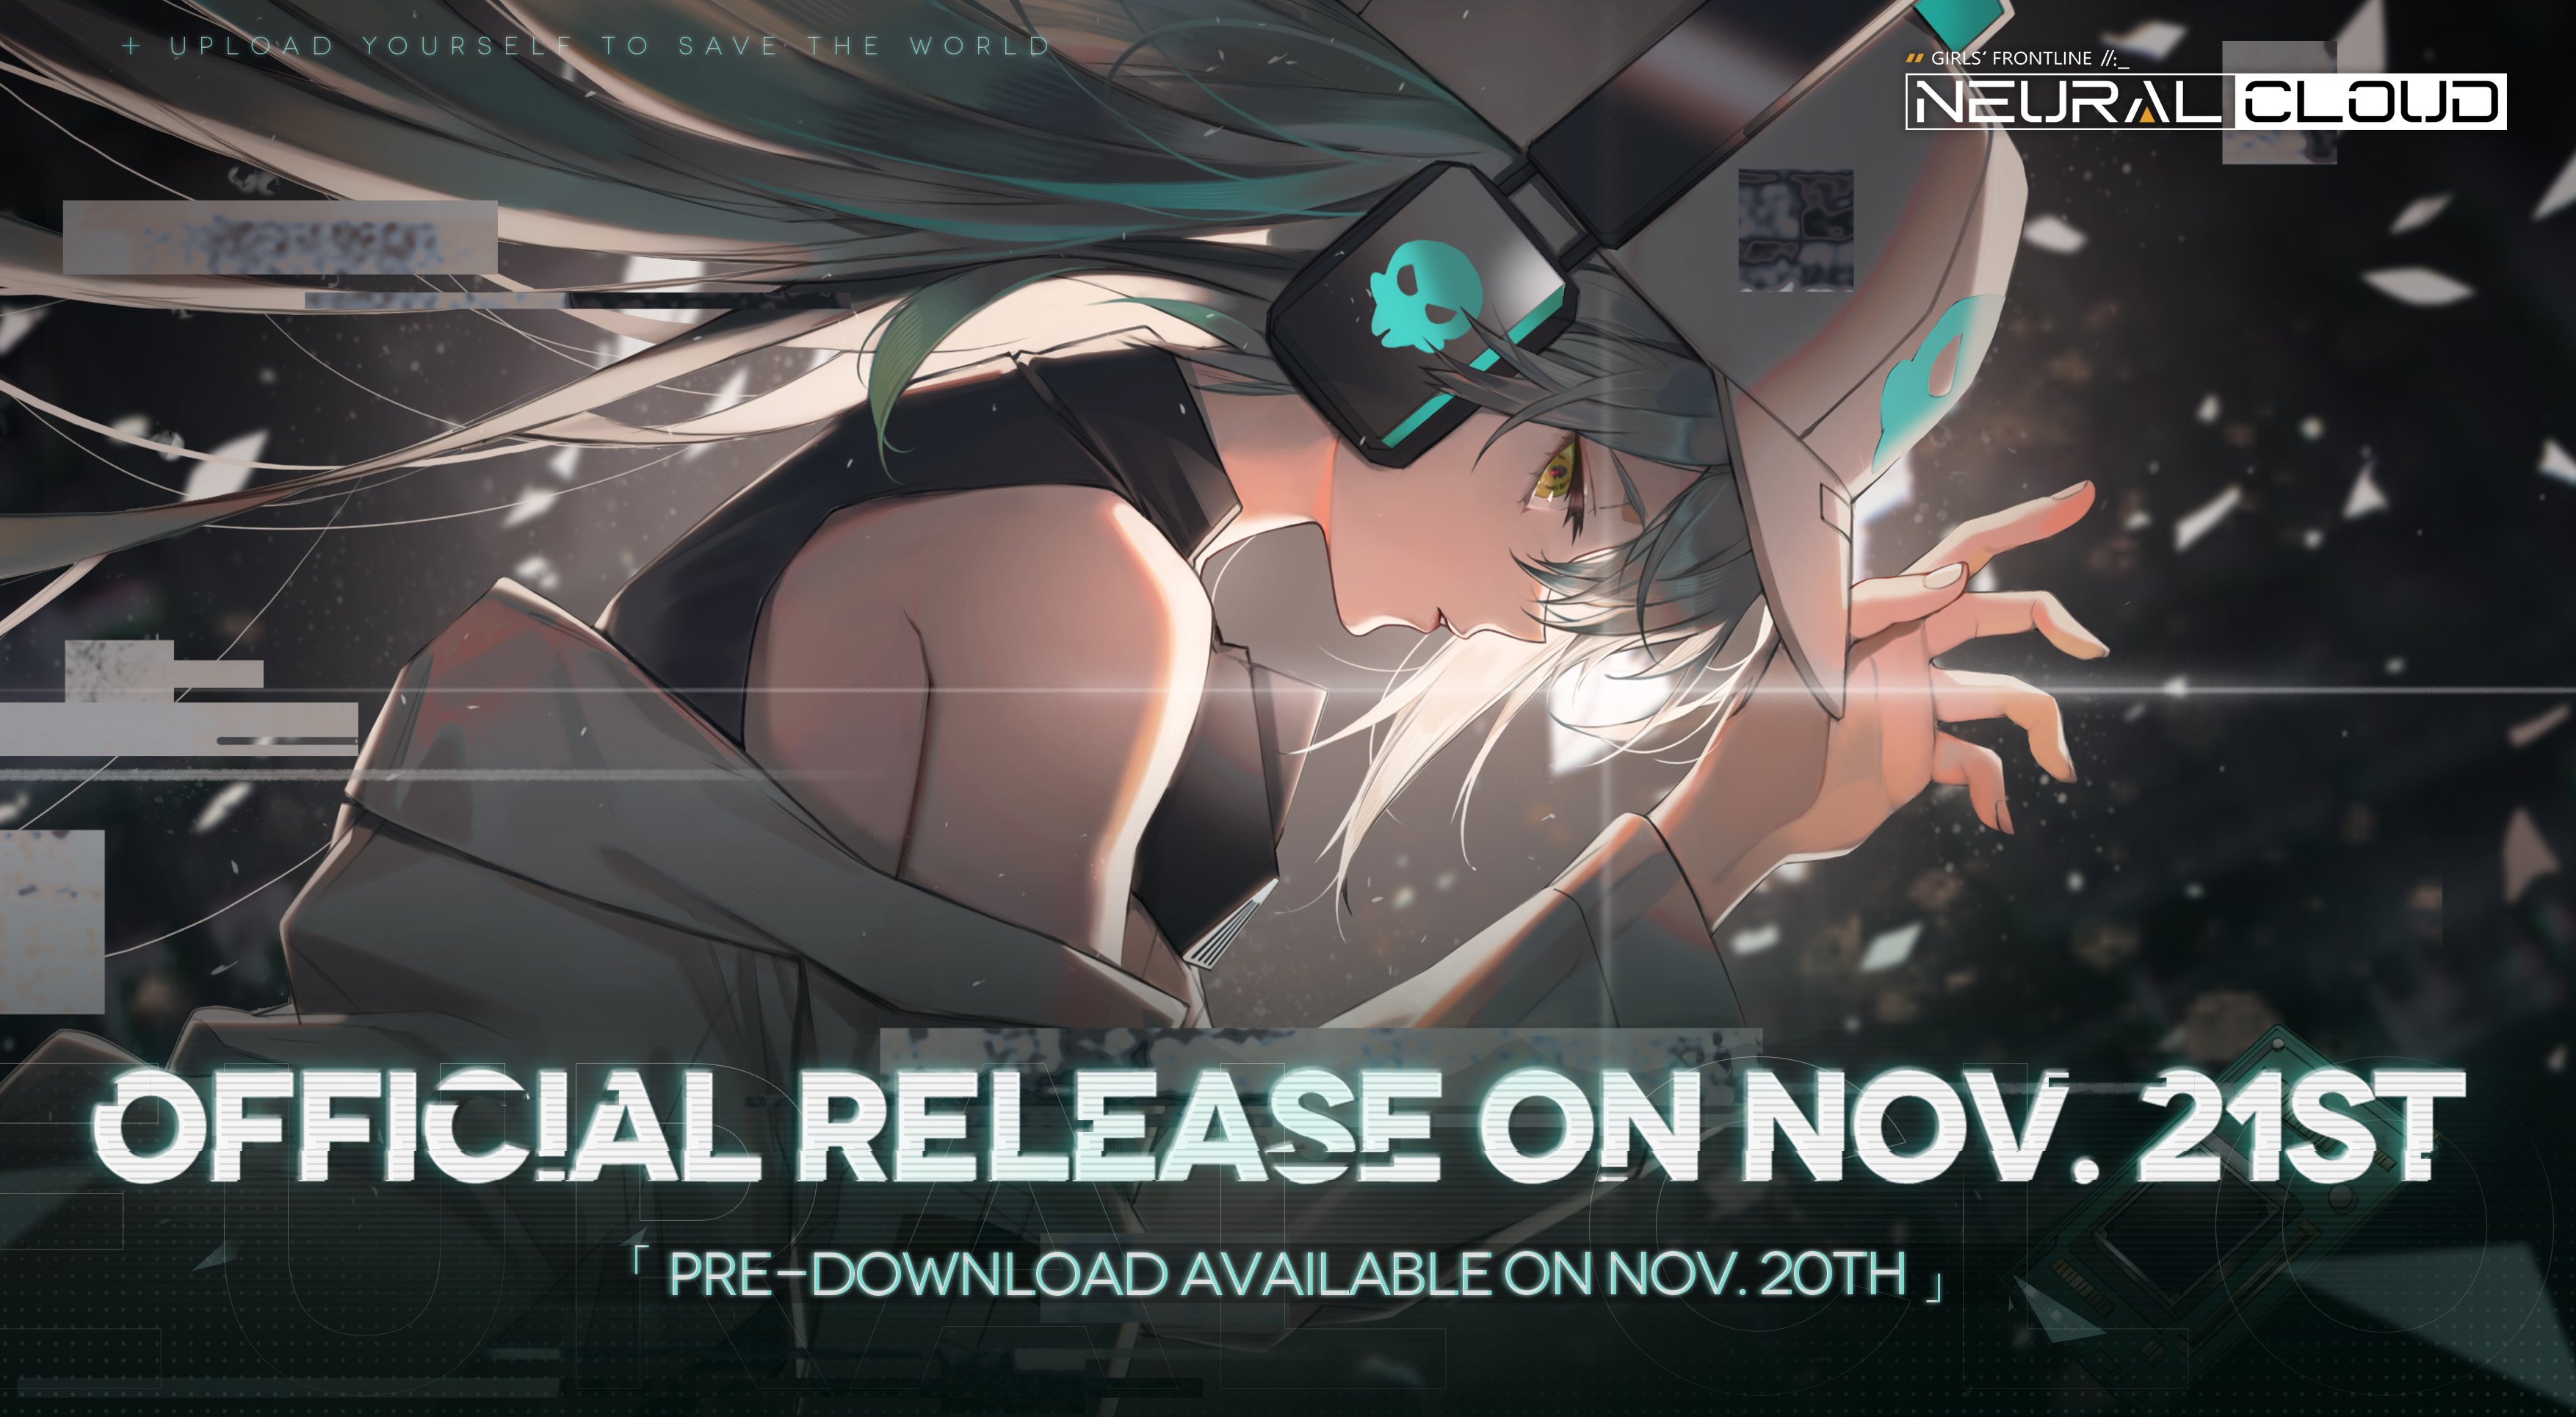 GIRLS' FRONTLINE: NEURAL CLOUD OFFICIAL LAUNCHES NOV 21ST 2022!